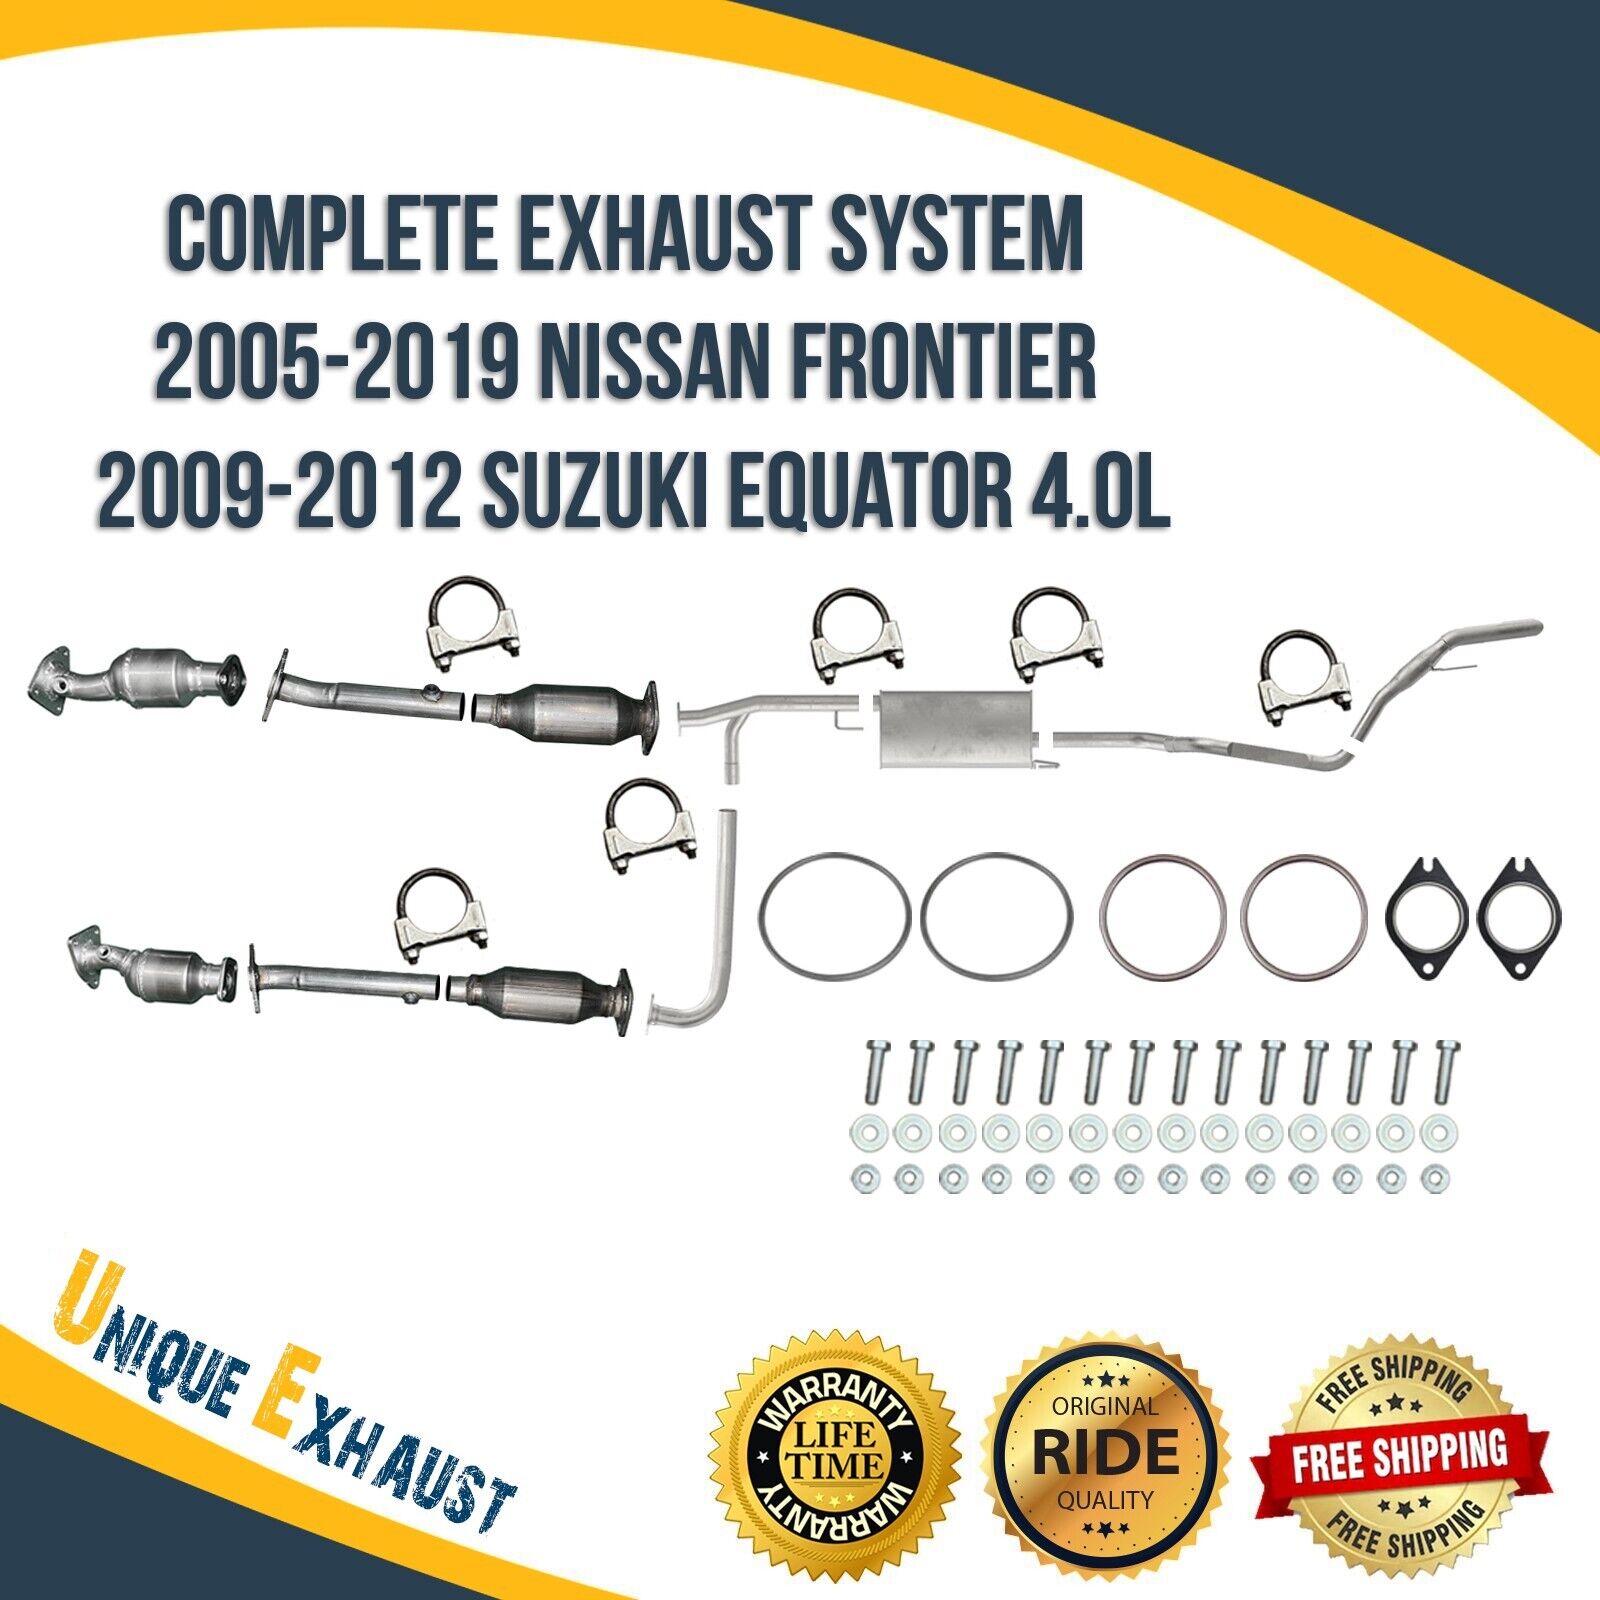 Complete Exhaust System for 2005-2019 Nissan Frontier|09-12 Suzuki Equator 4.0L